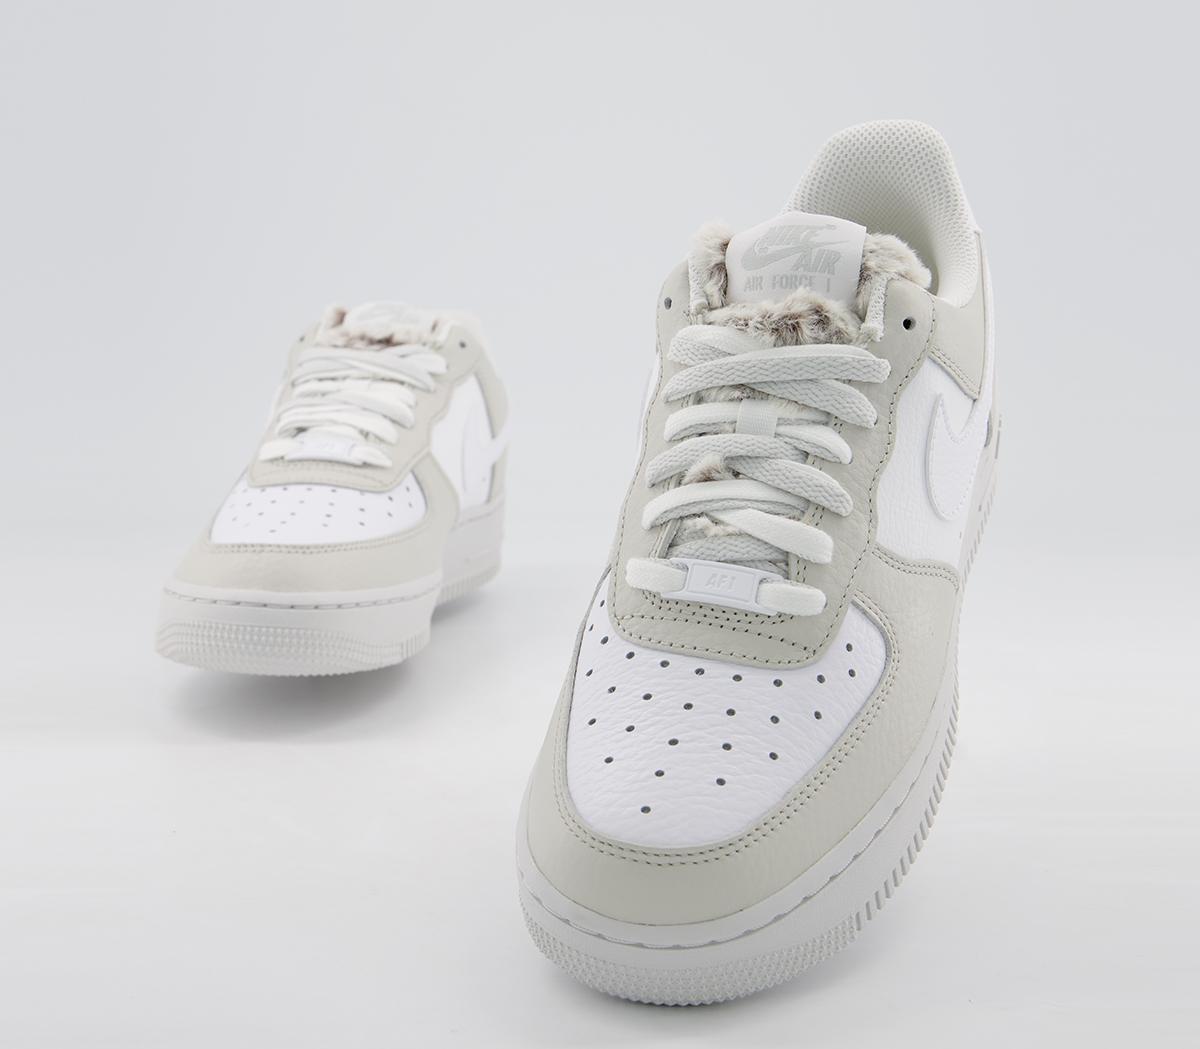 nike air force 1 '07 mid trainers in light bone with gum sole